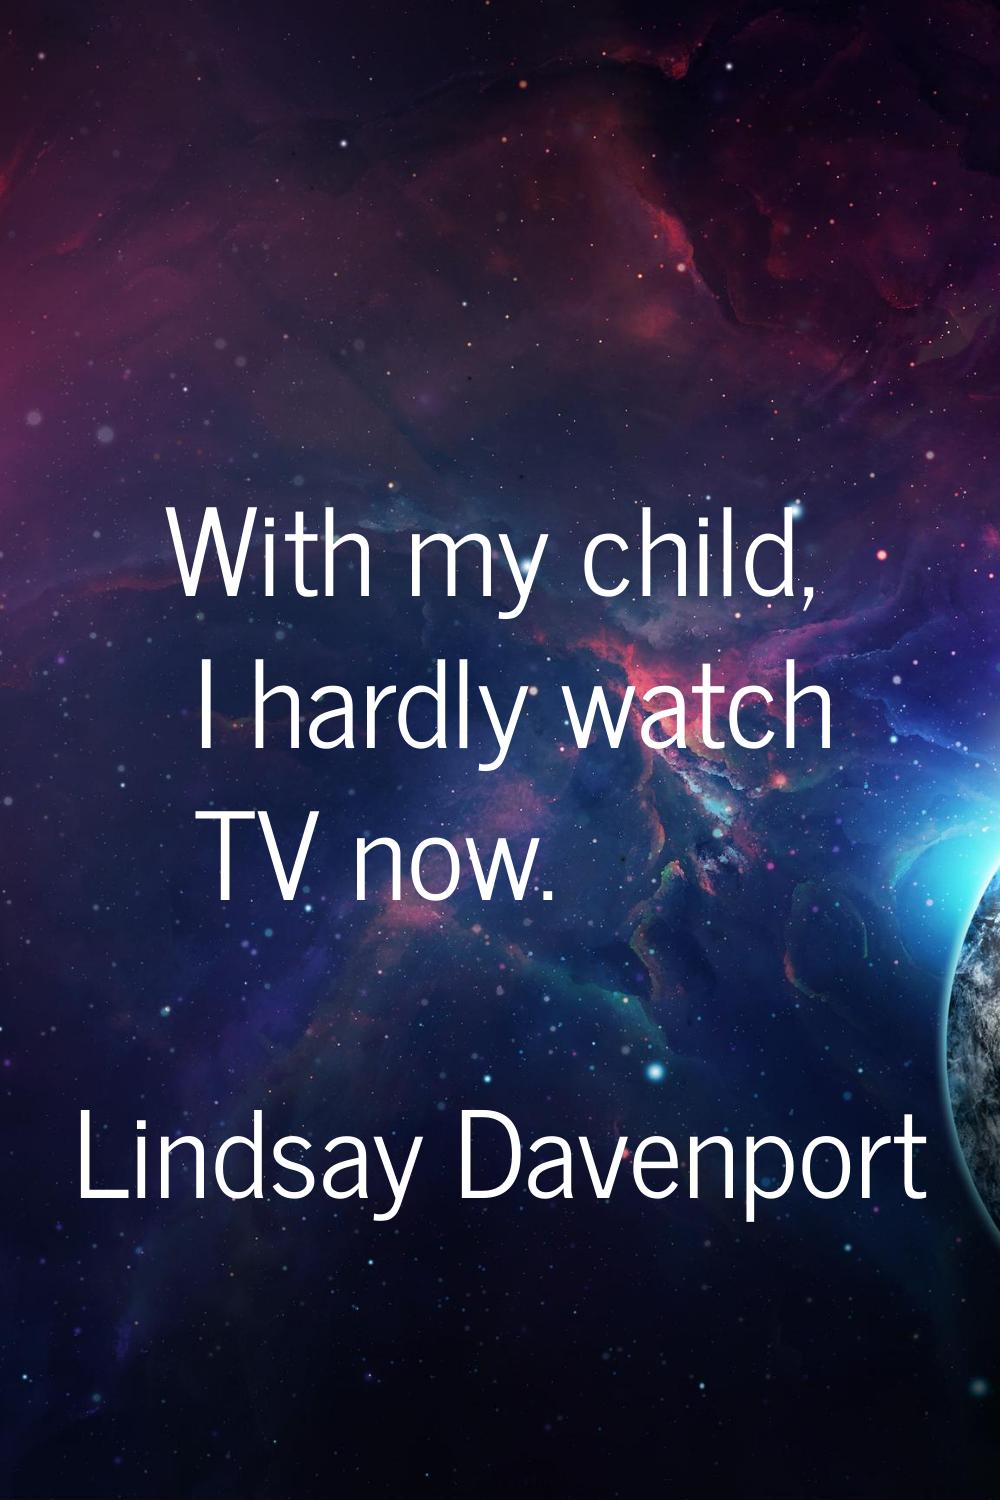 With my child, I hardly watch TV now.